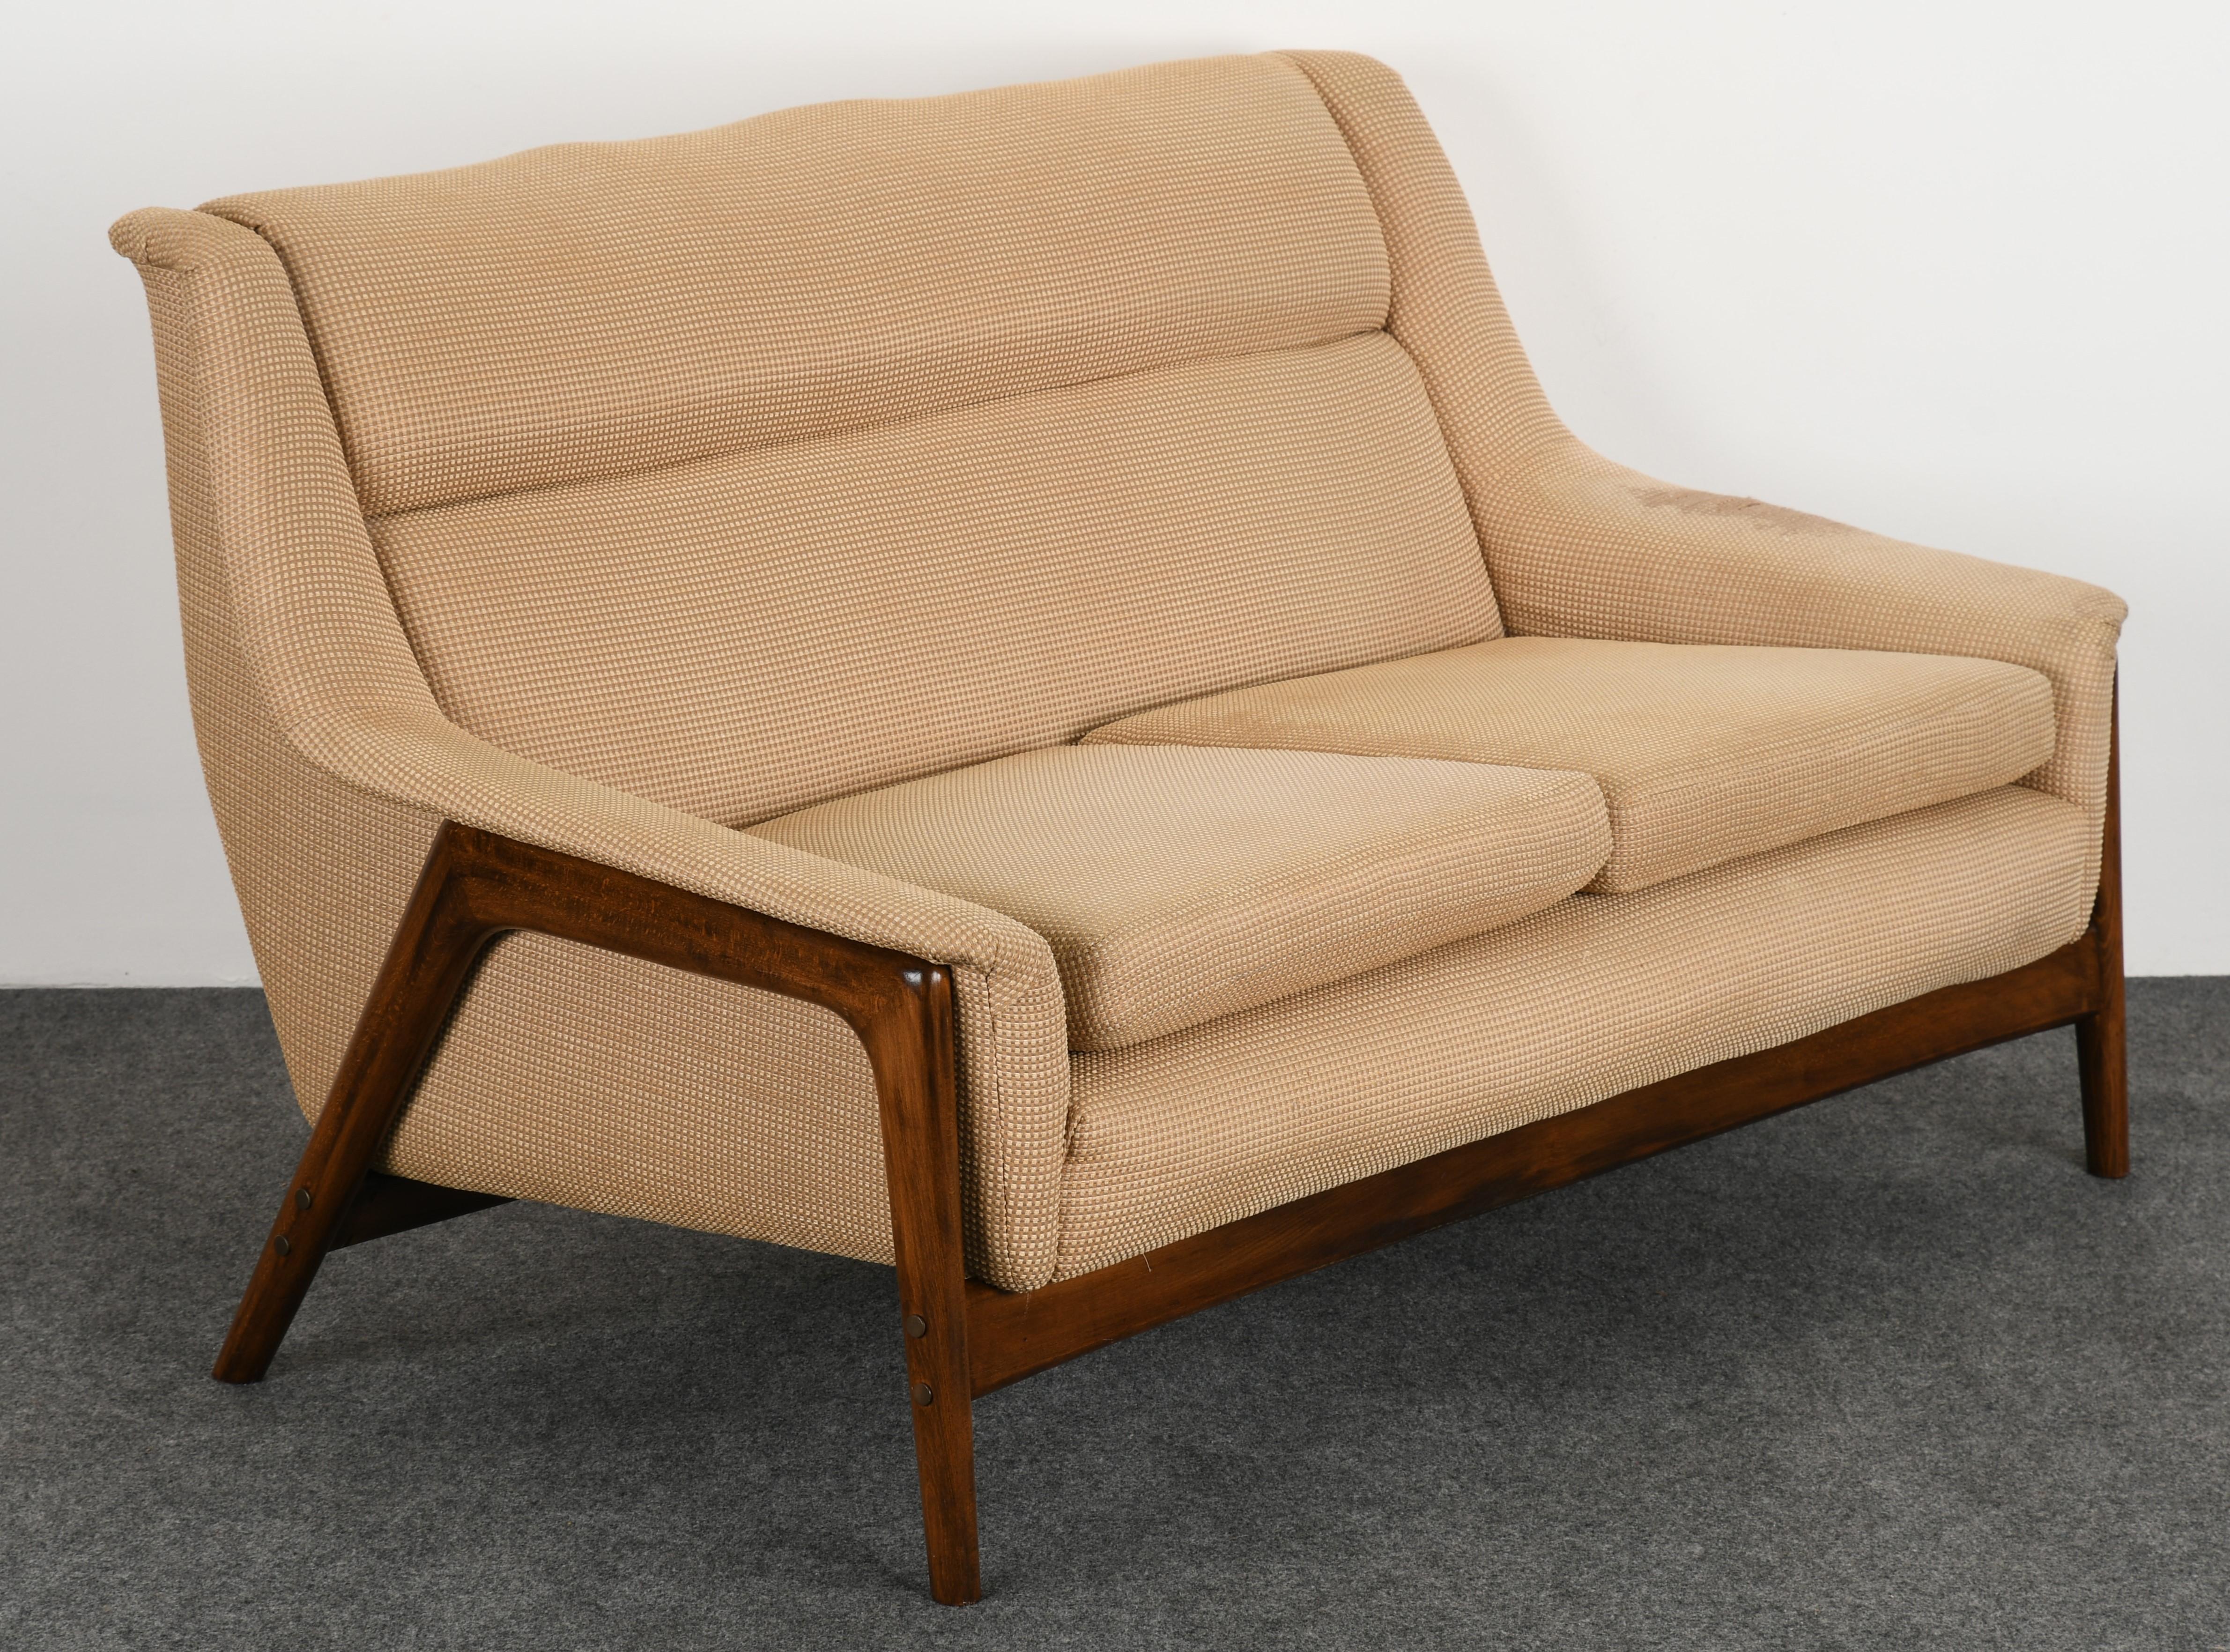 A modernist settee designed by Folke Ohlsson for DUX. The settee has a sleek modern beech wood sculptural frame. This is a great example of Mid-Century Modern. The settee is structurally sound, however, some spots to the fabric. New upholstery is